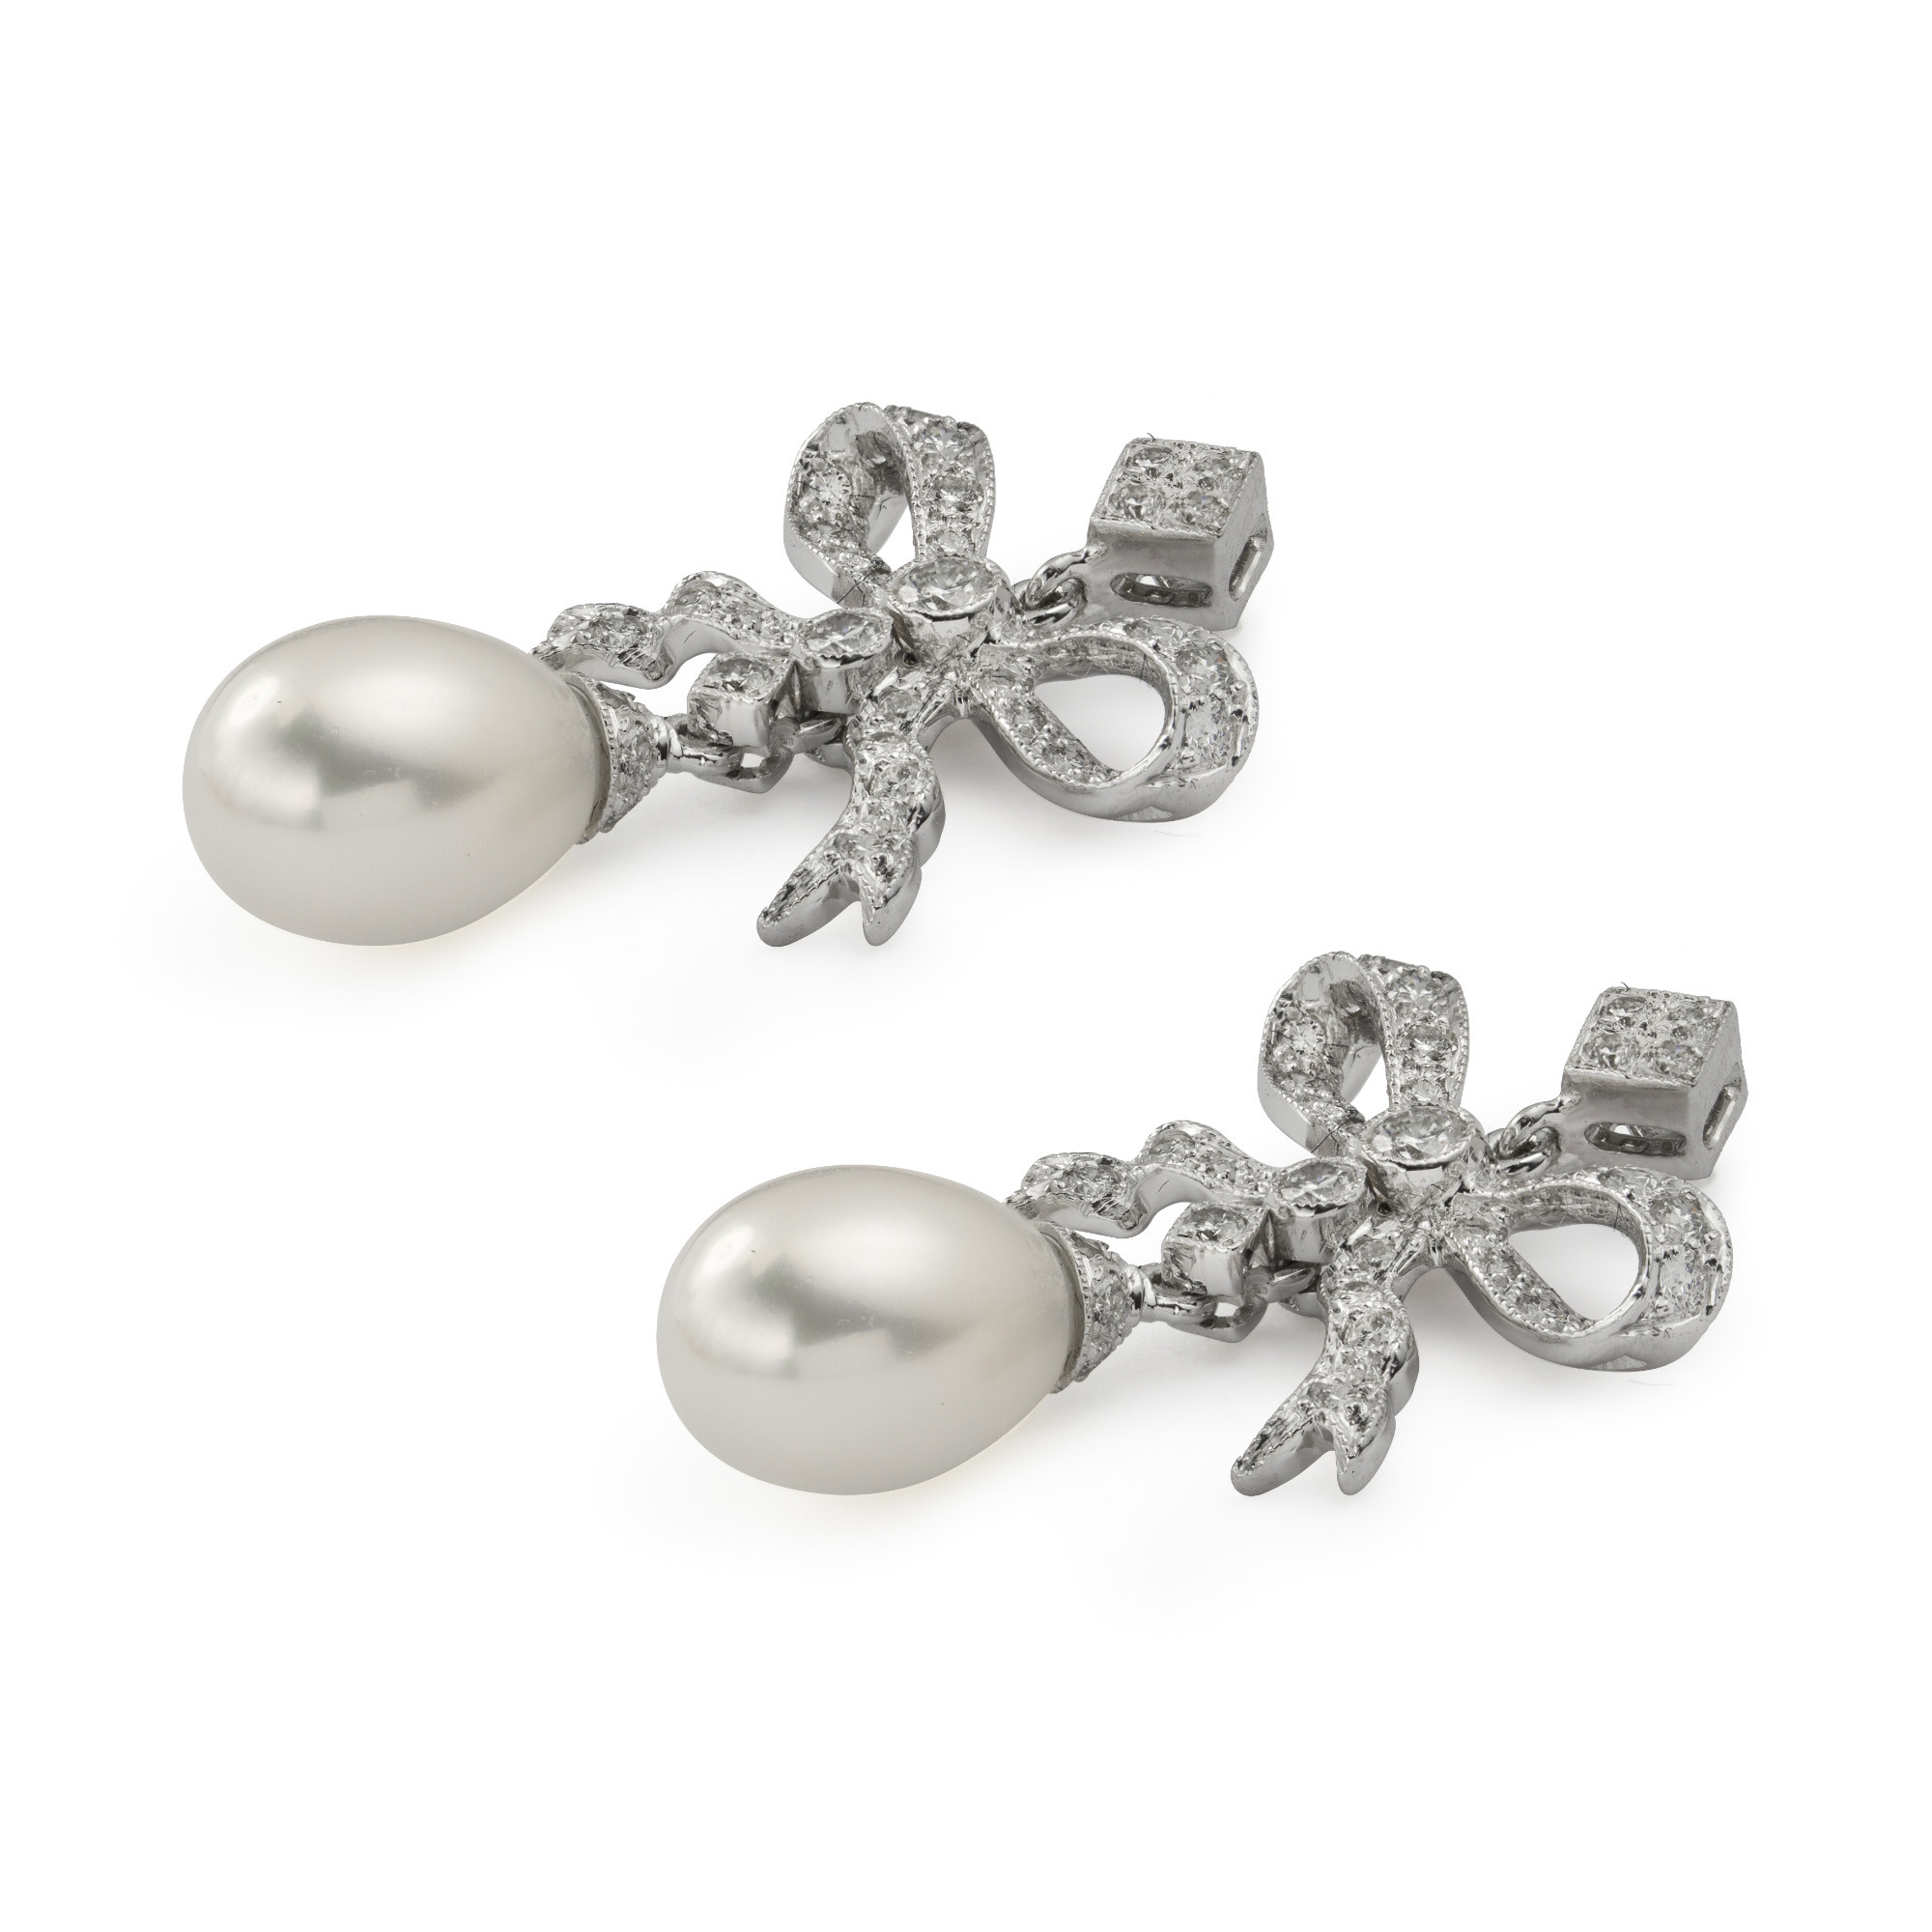 Diamond Bow Earrings
 A pair of cultured pearl and diamond bow earrings